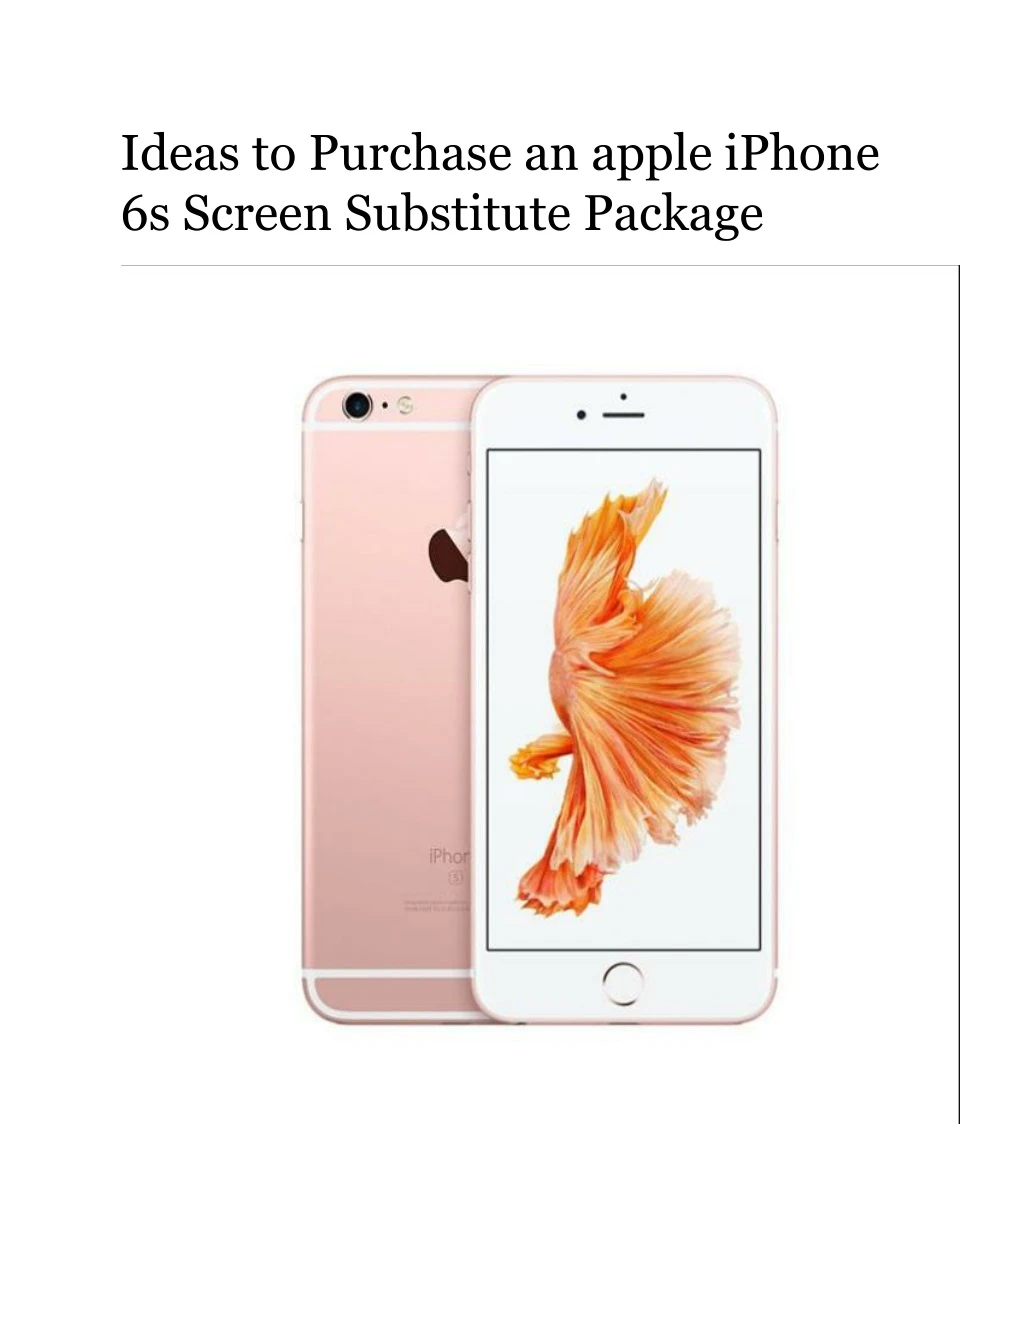 ideas to purchase an apple iphone 6s screen